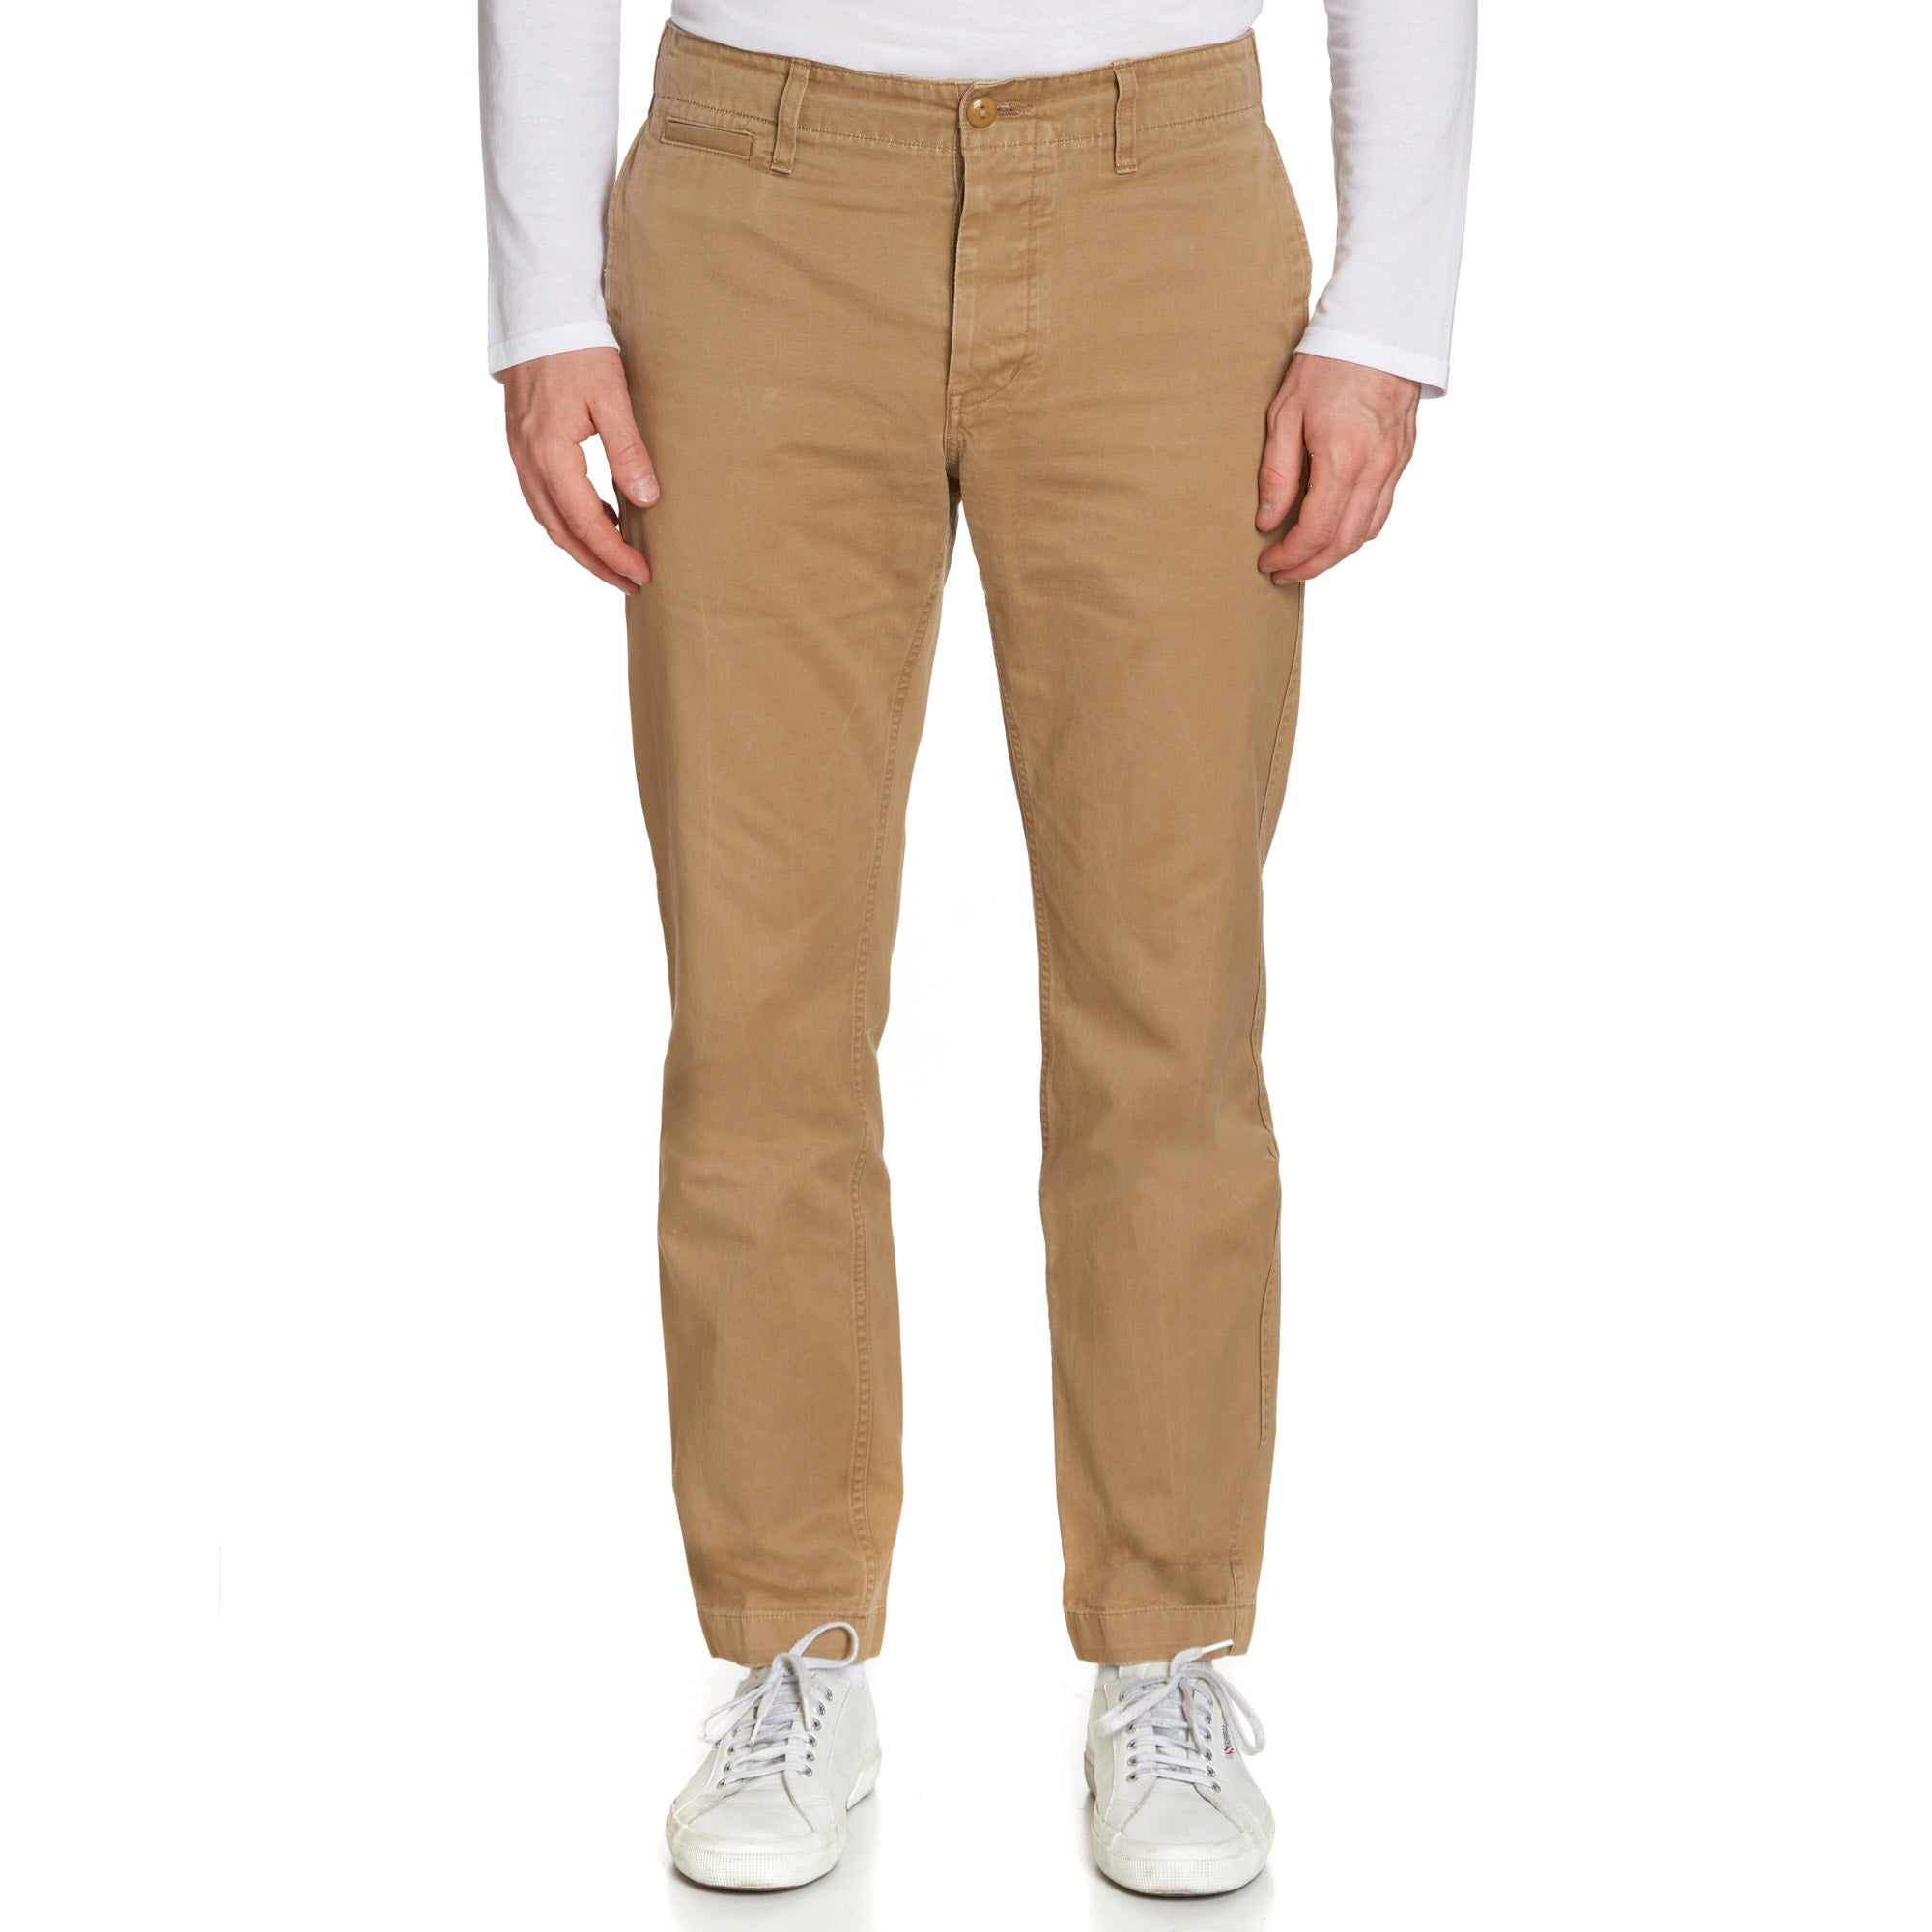 NIGEL CABOURN Tan Cotton Officer's Chino Pants US 33 34 Slim Fit Japan